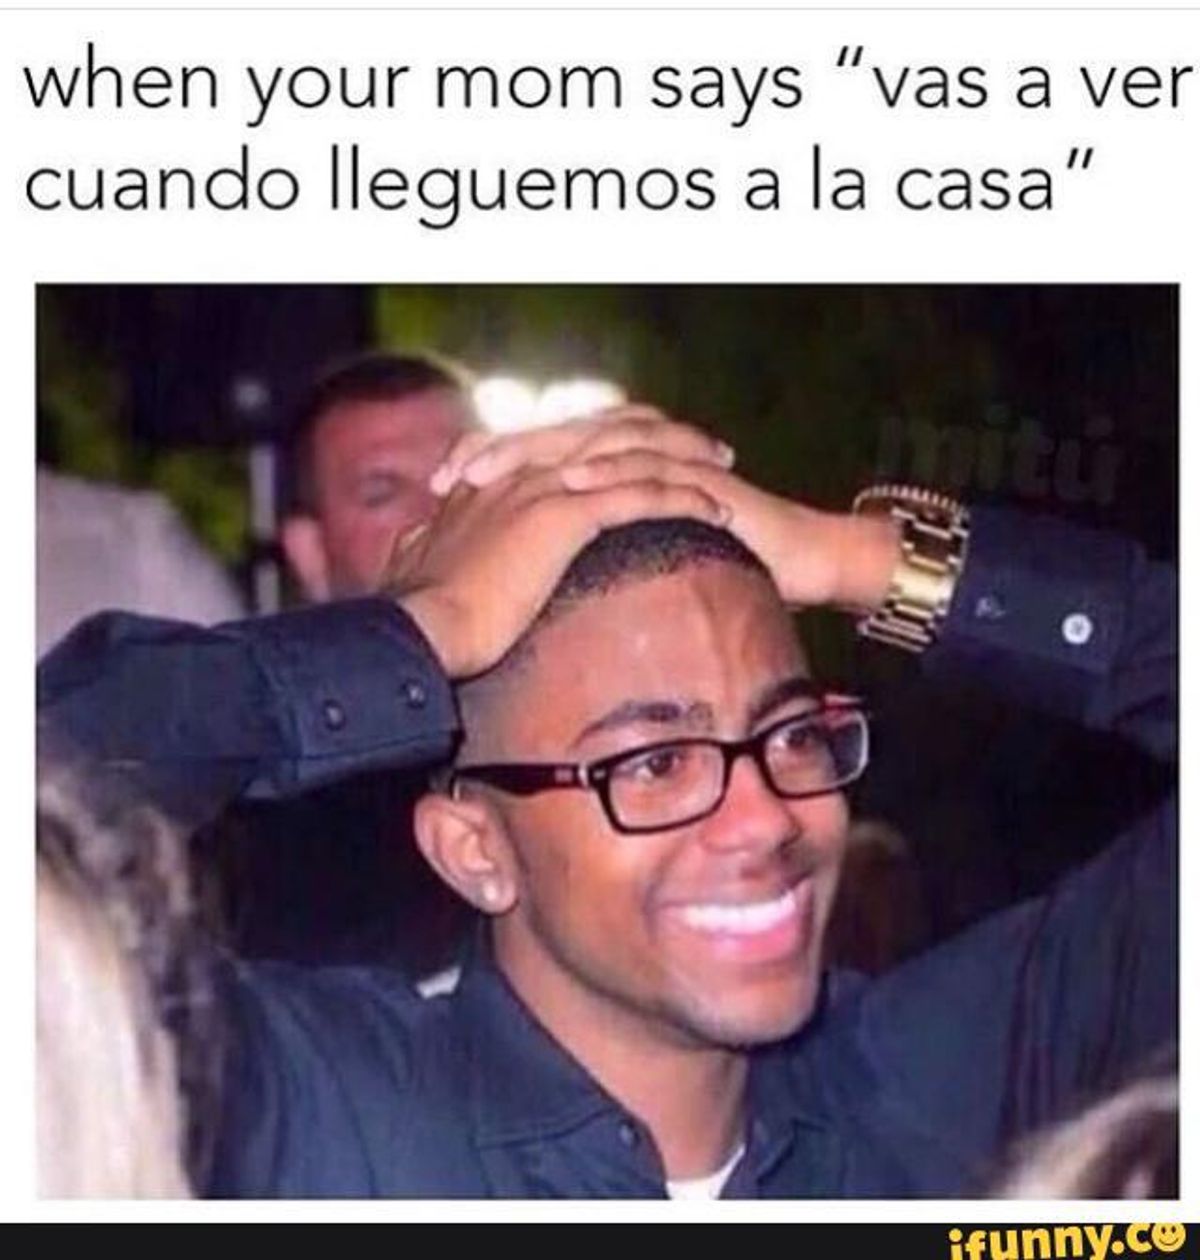 Growing Up With Spanish-Speaking Parents